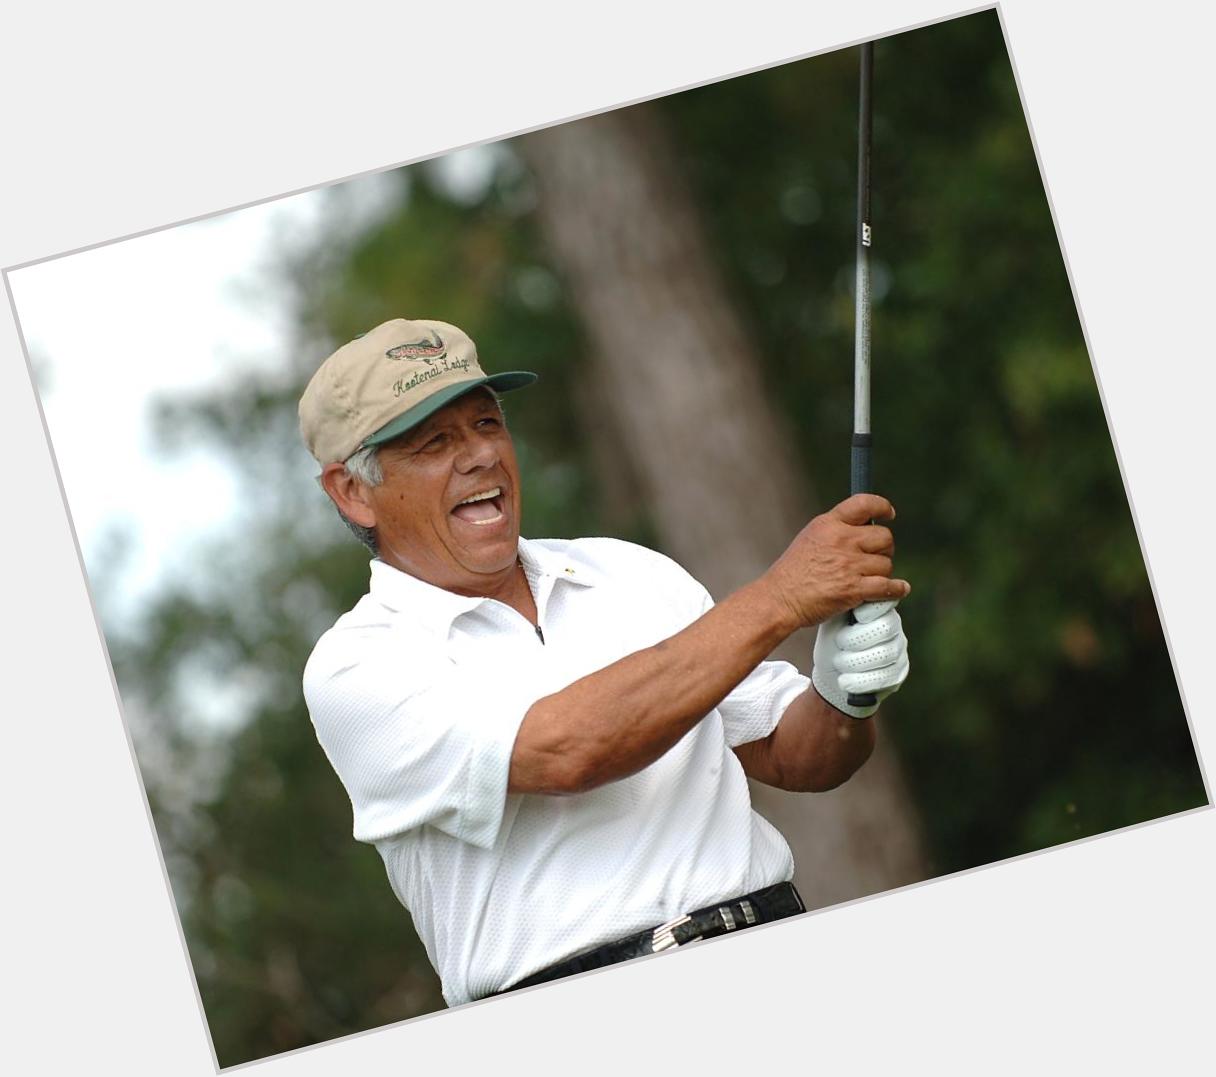 Happy 75th Birthday to Lee Trevino! More on his Hall of Fame career here:  